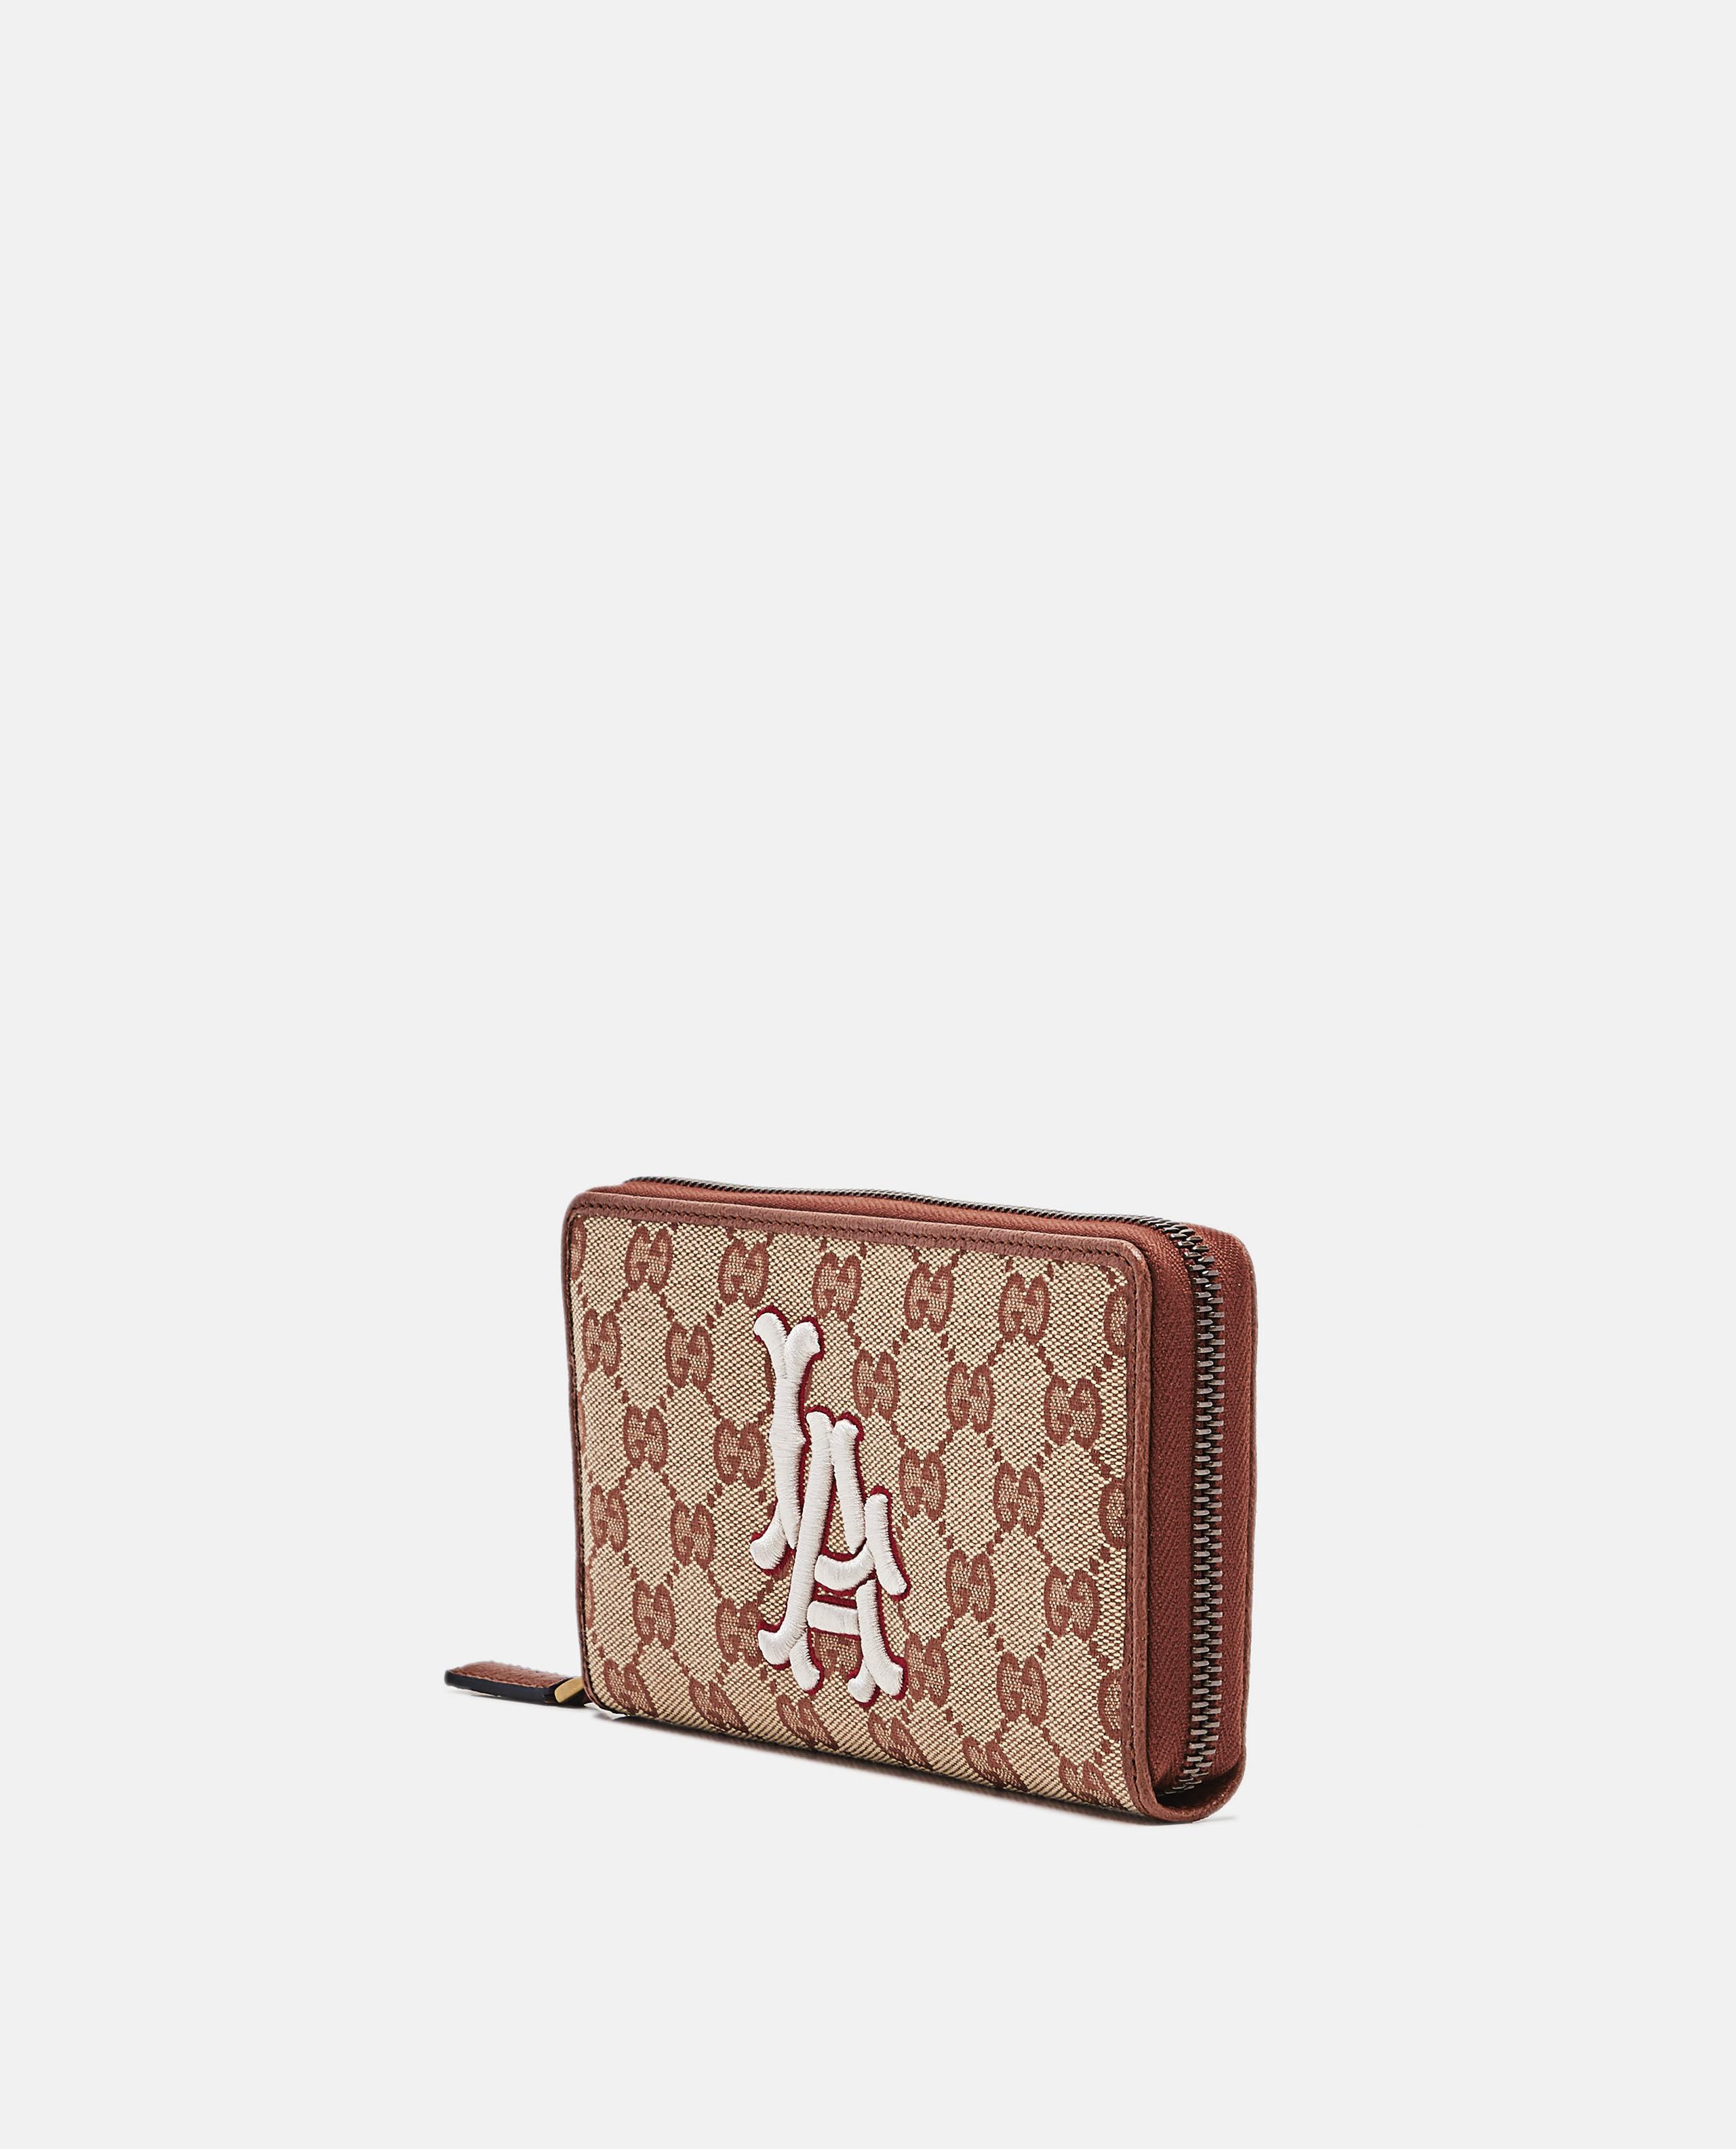 Gucci Canvas Original Gg Zip Around Wallet With La Angels Patch in Brown for Men - Lyst